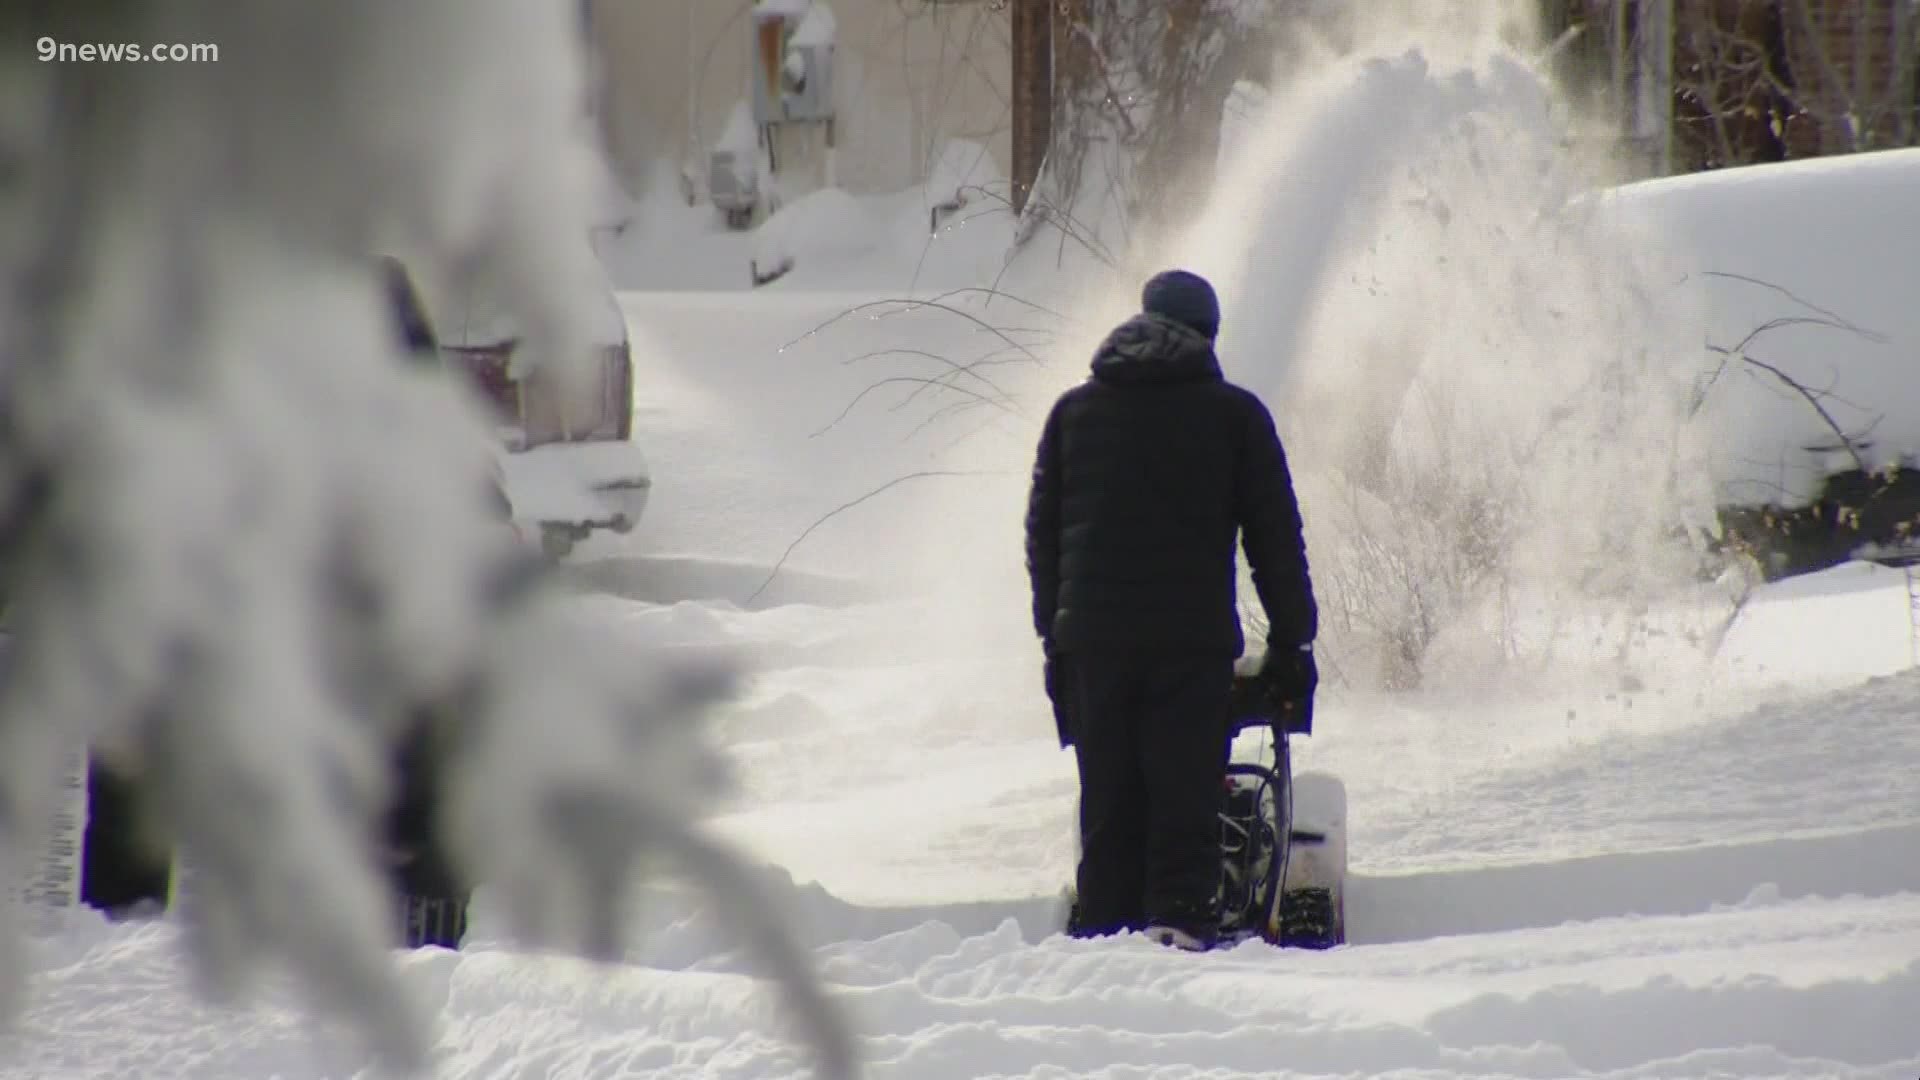 It's more than clearing sidewalks. A home inspector shares tips about precautions to take as we dig out from feet of snow.